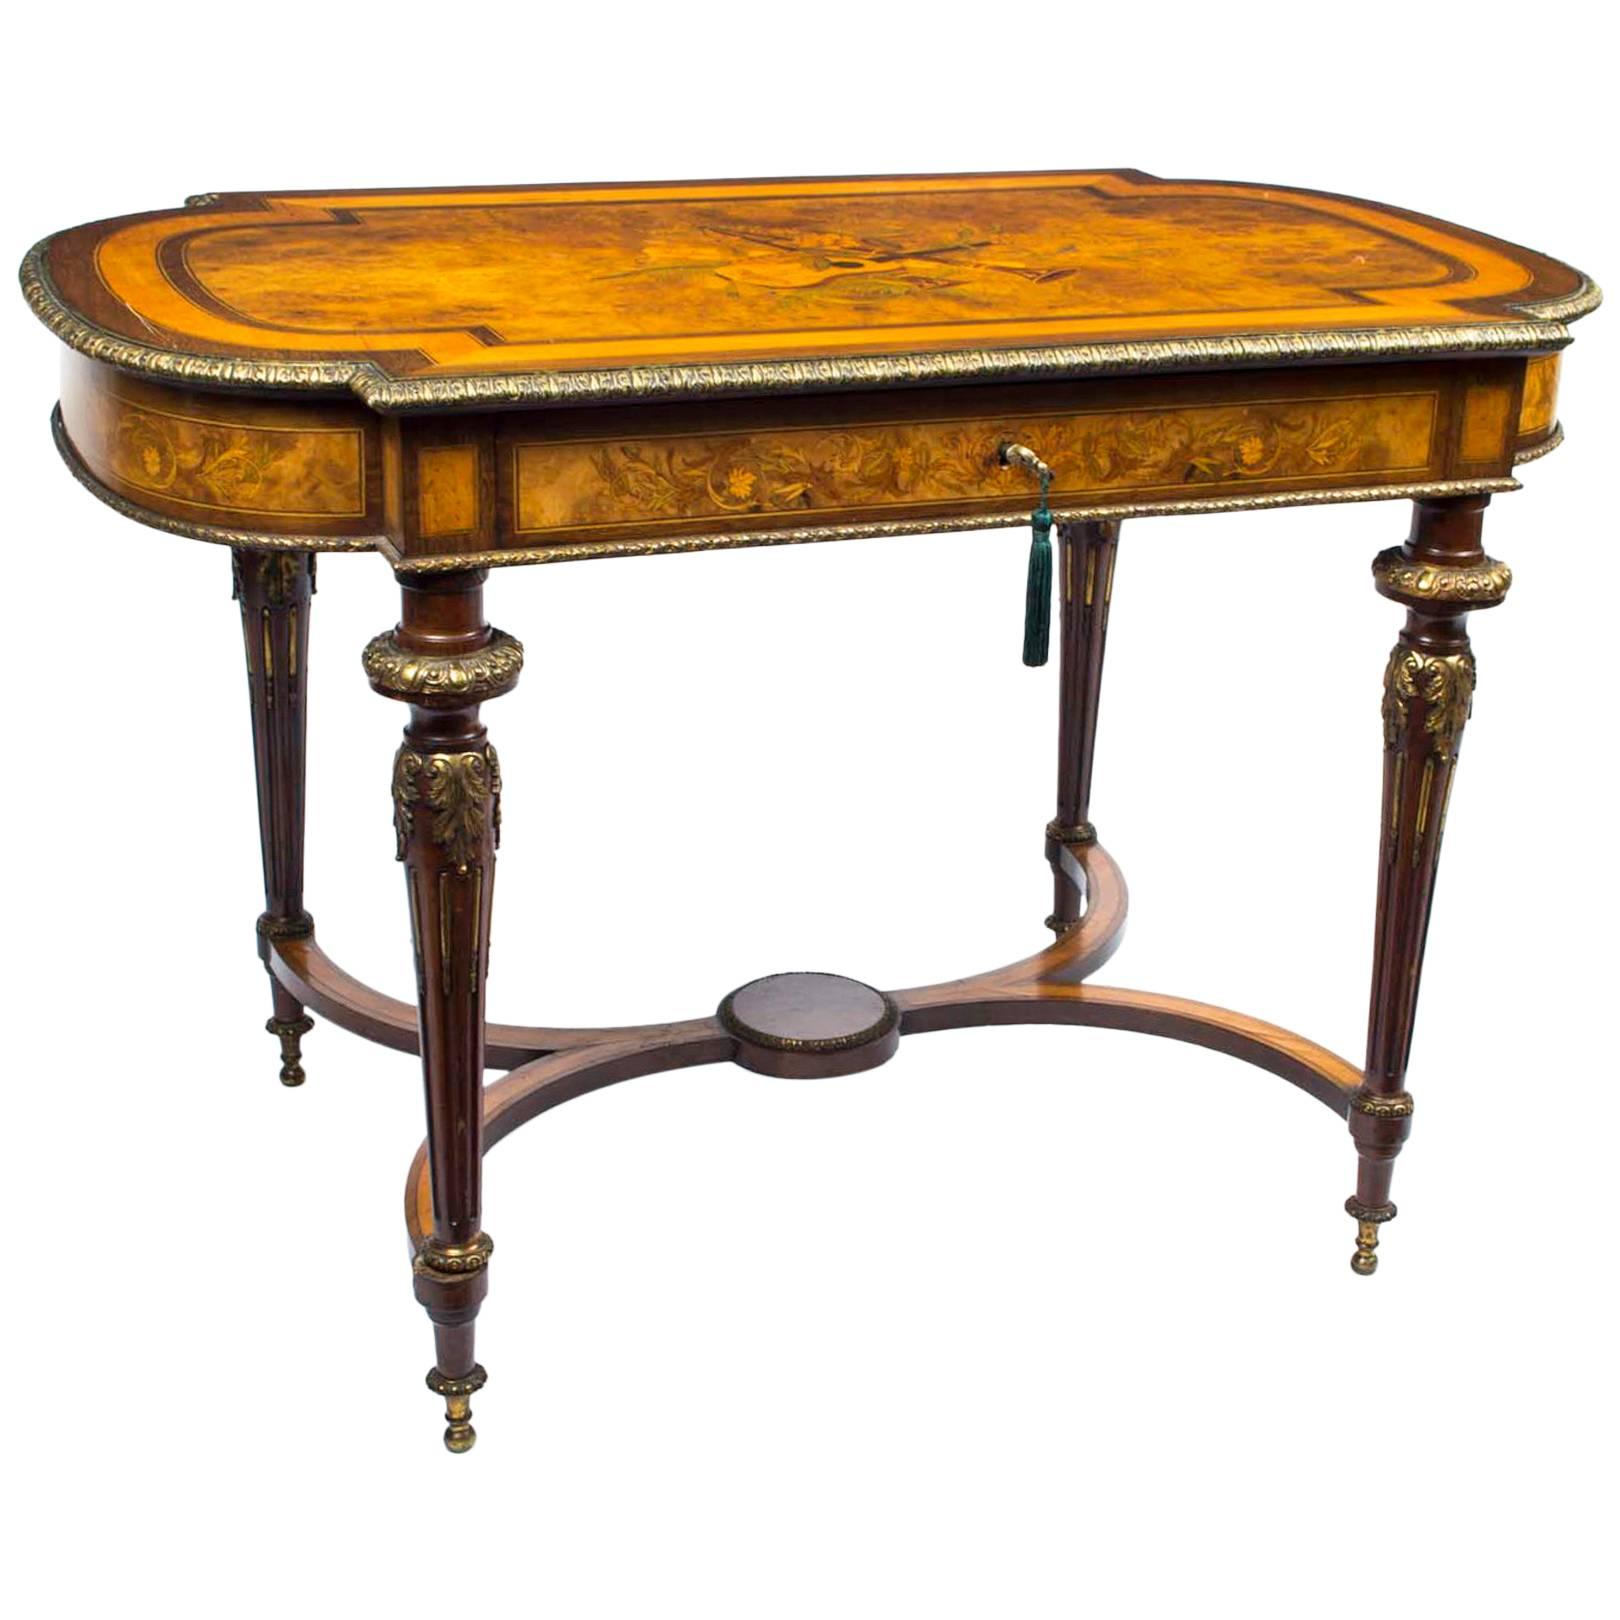 Antique French Marquetry Centre Writing Table, circa 1860